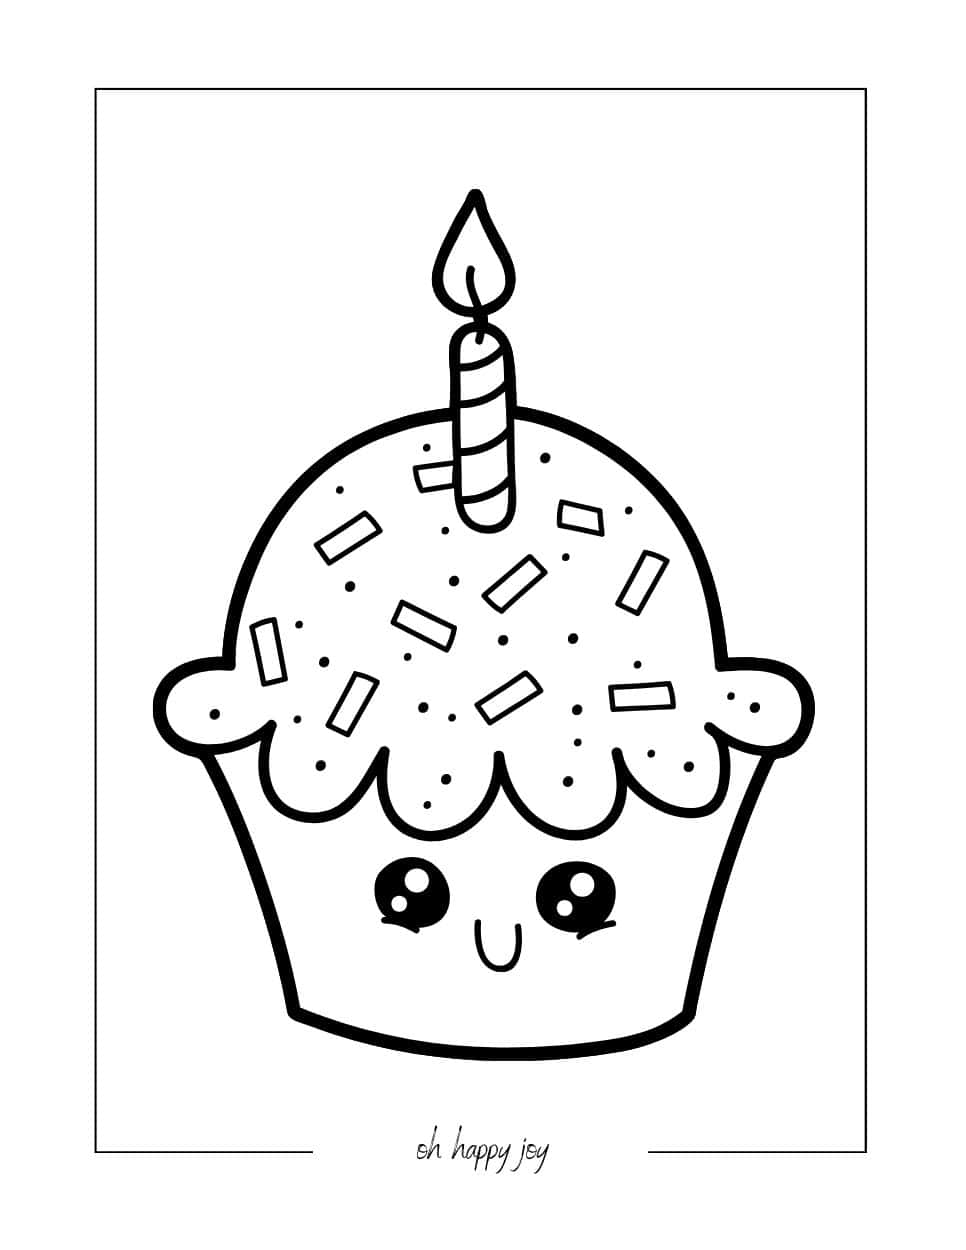 cute cupcake coloring page